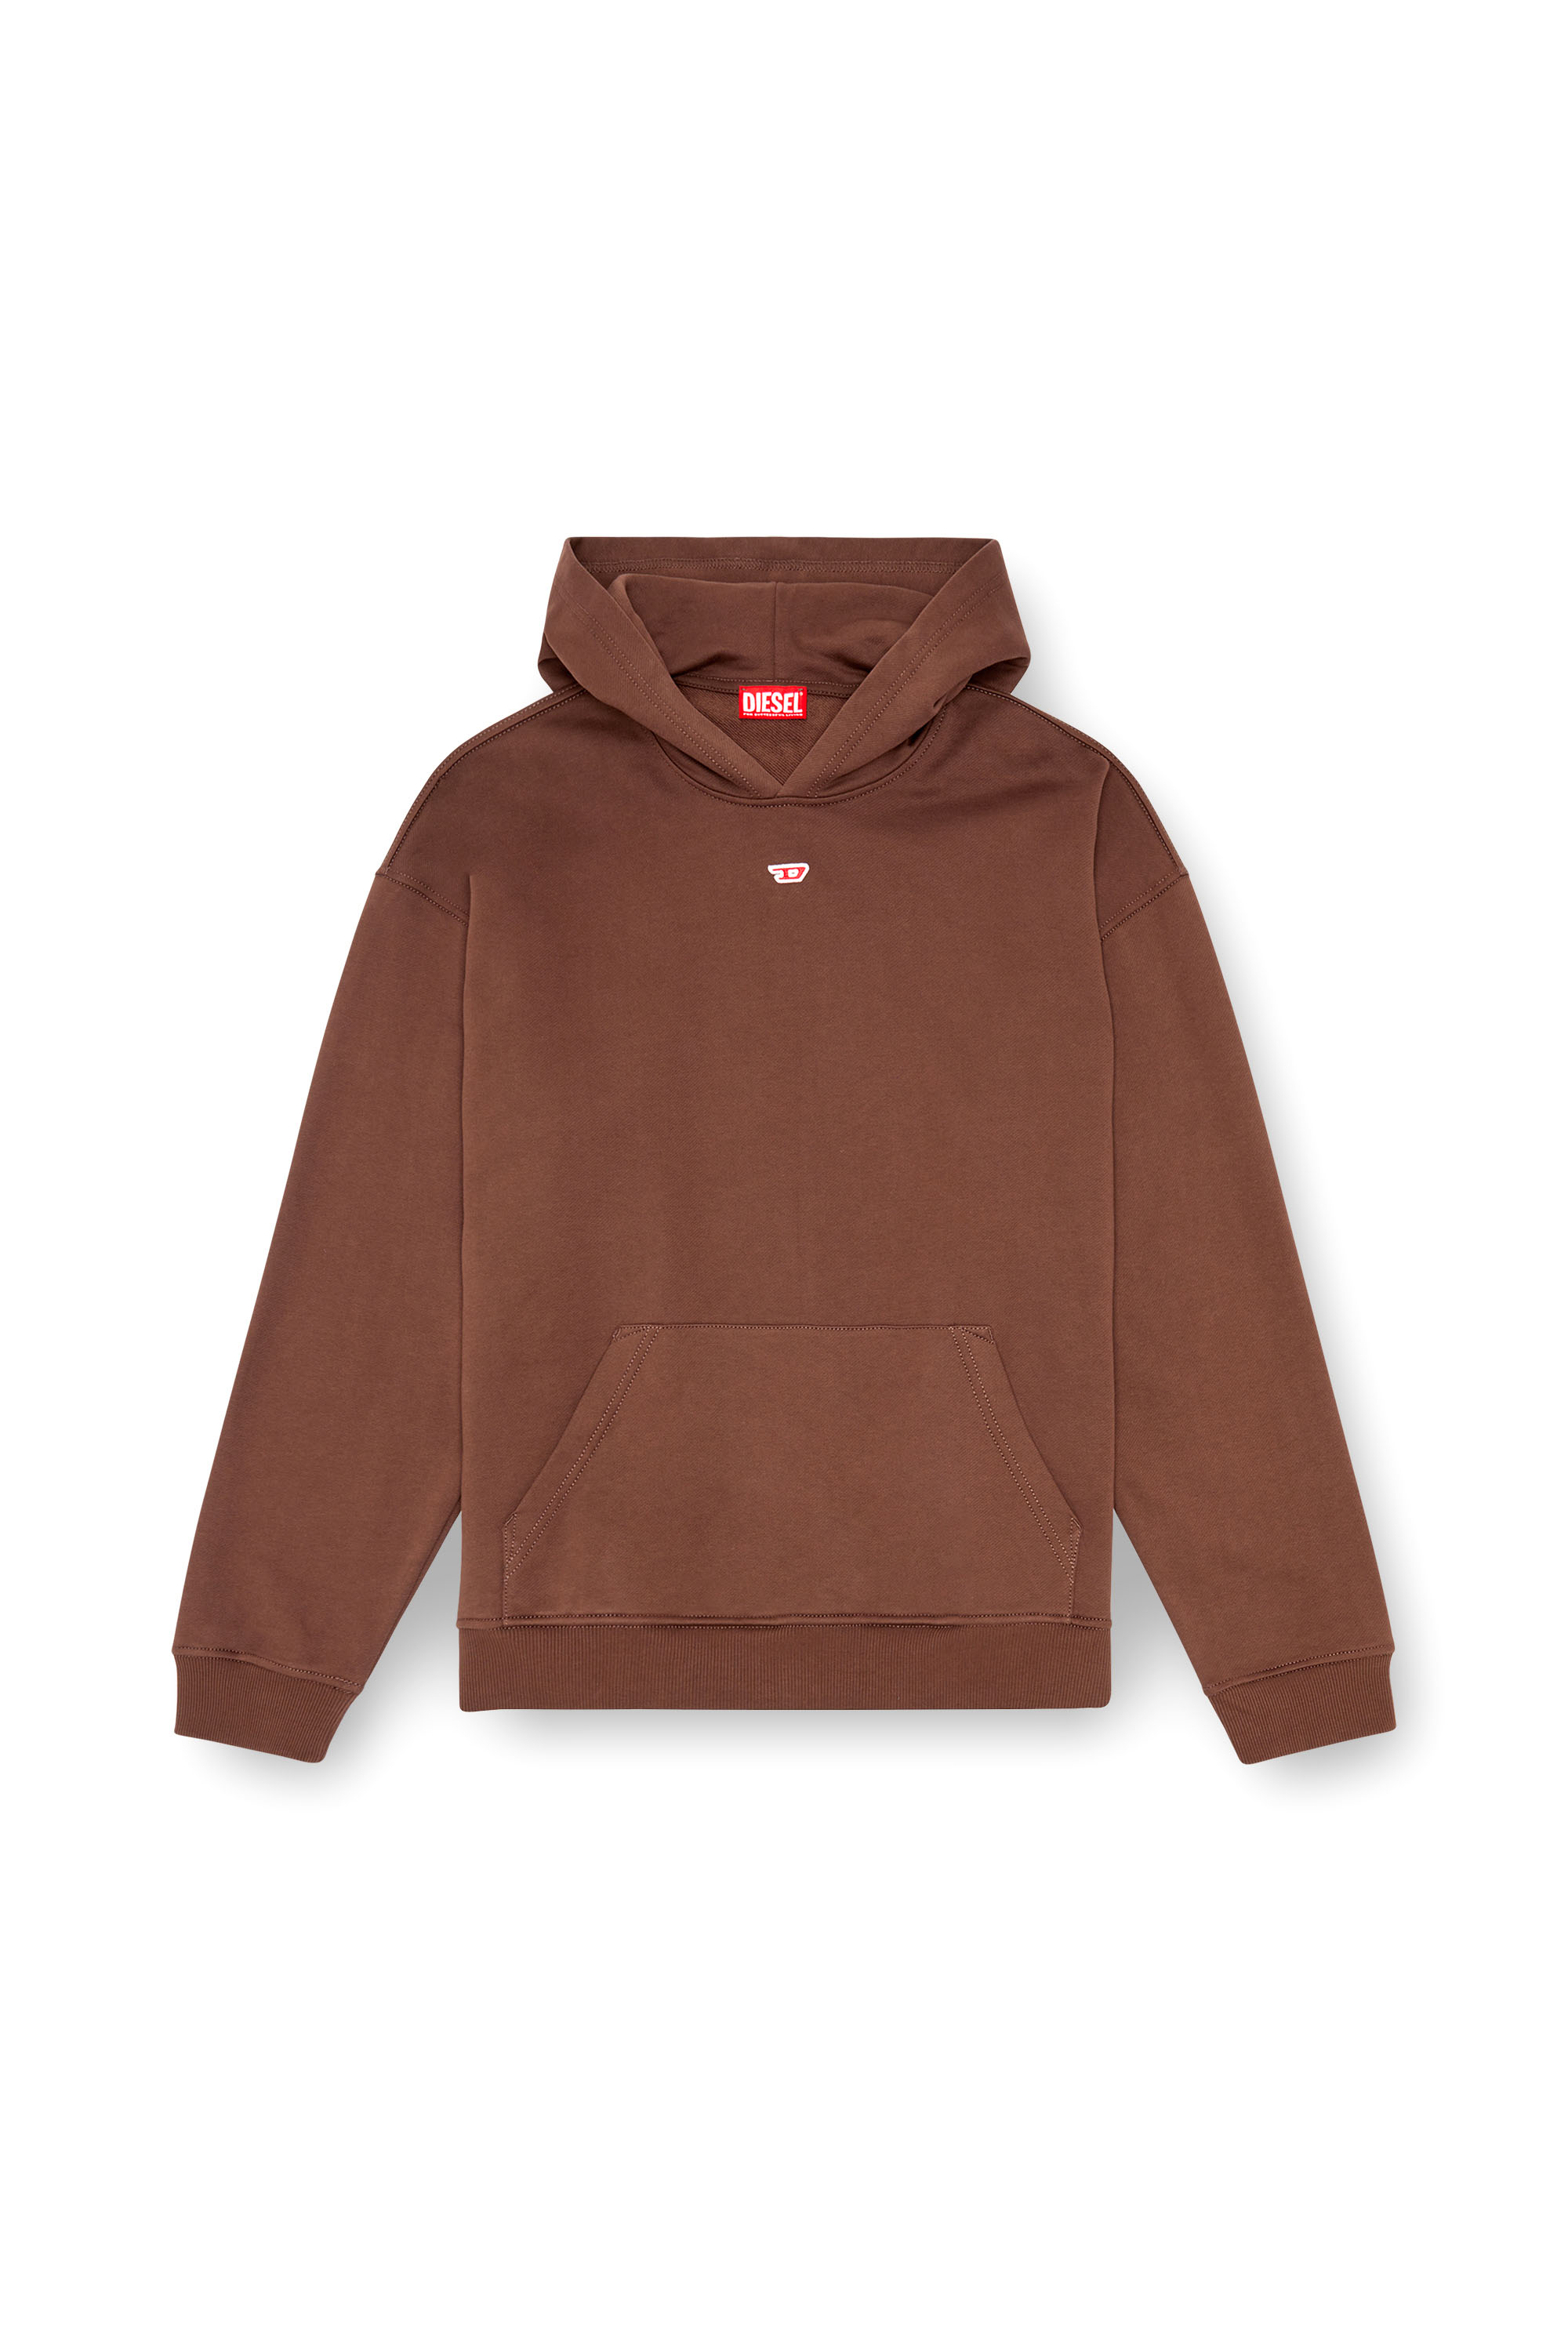 Diesel - S-BOXT-HOOD-D, Man Hoodie with D logo patch in Brown - Image 4